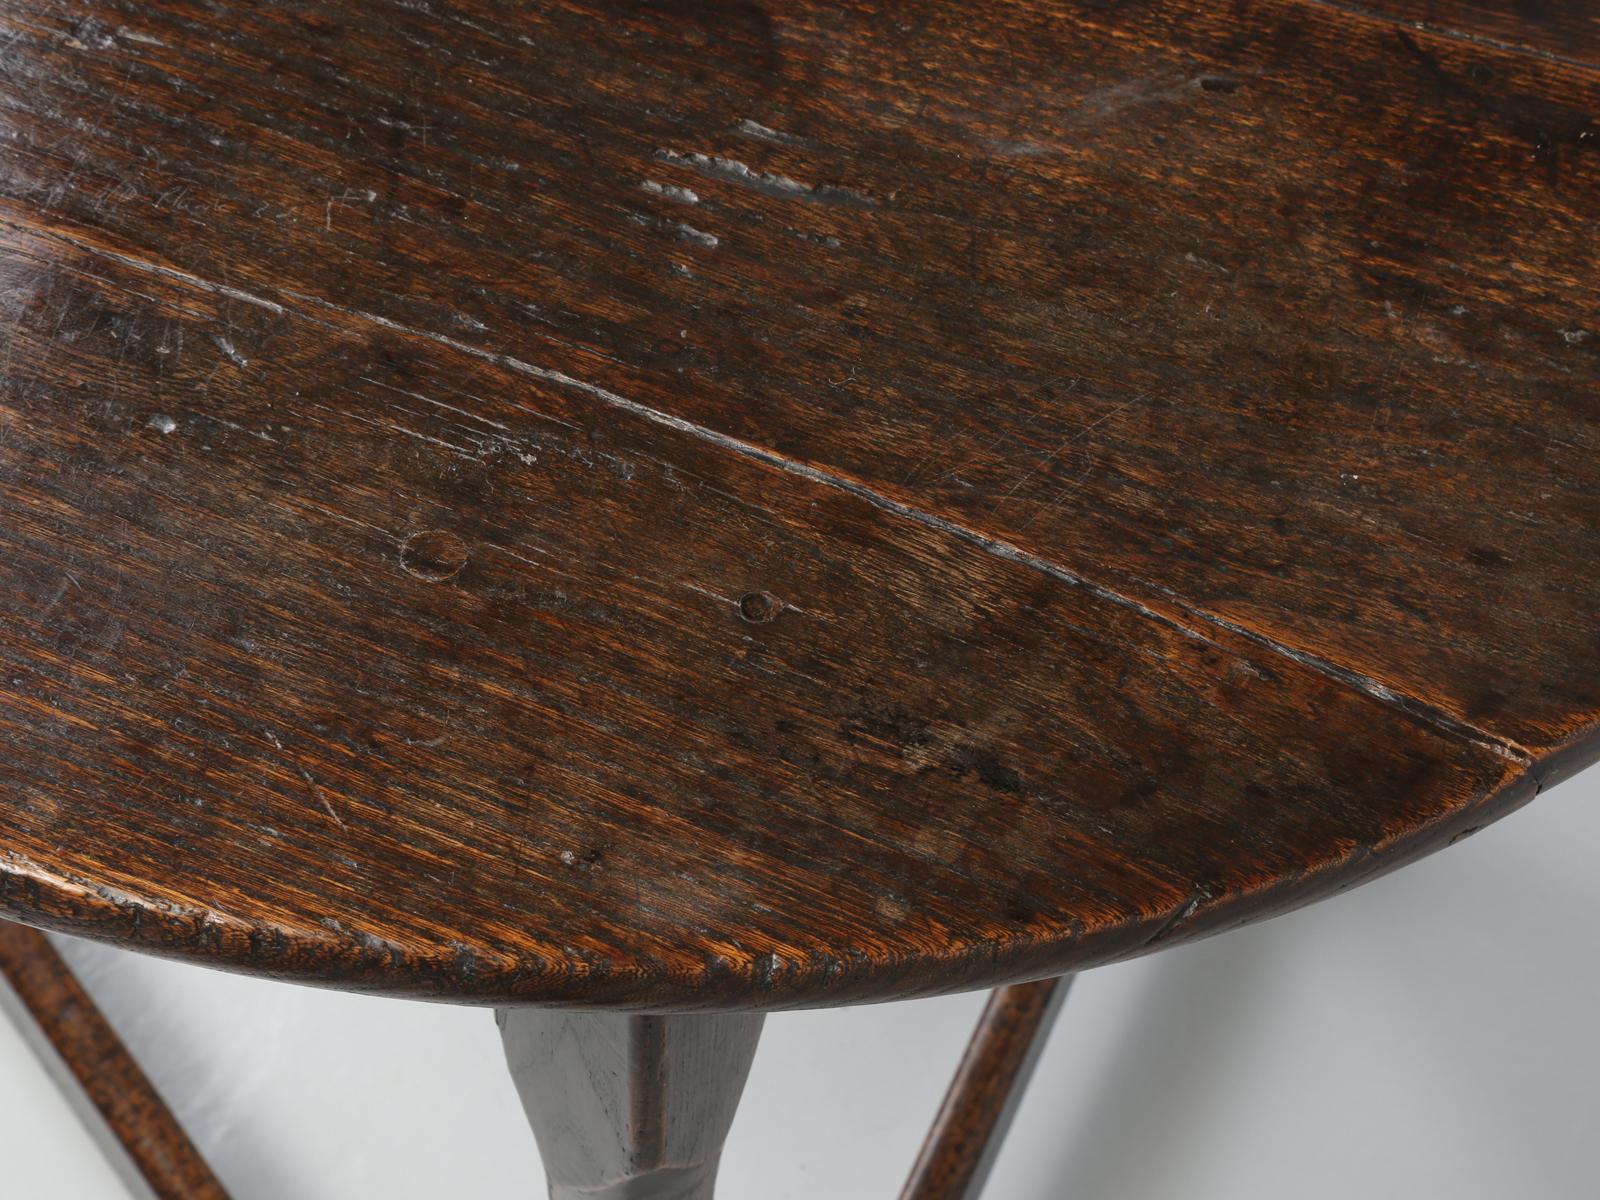 Mid-19th Century Antique English Cricket Table with a Great Original Patina, circa 1800s